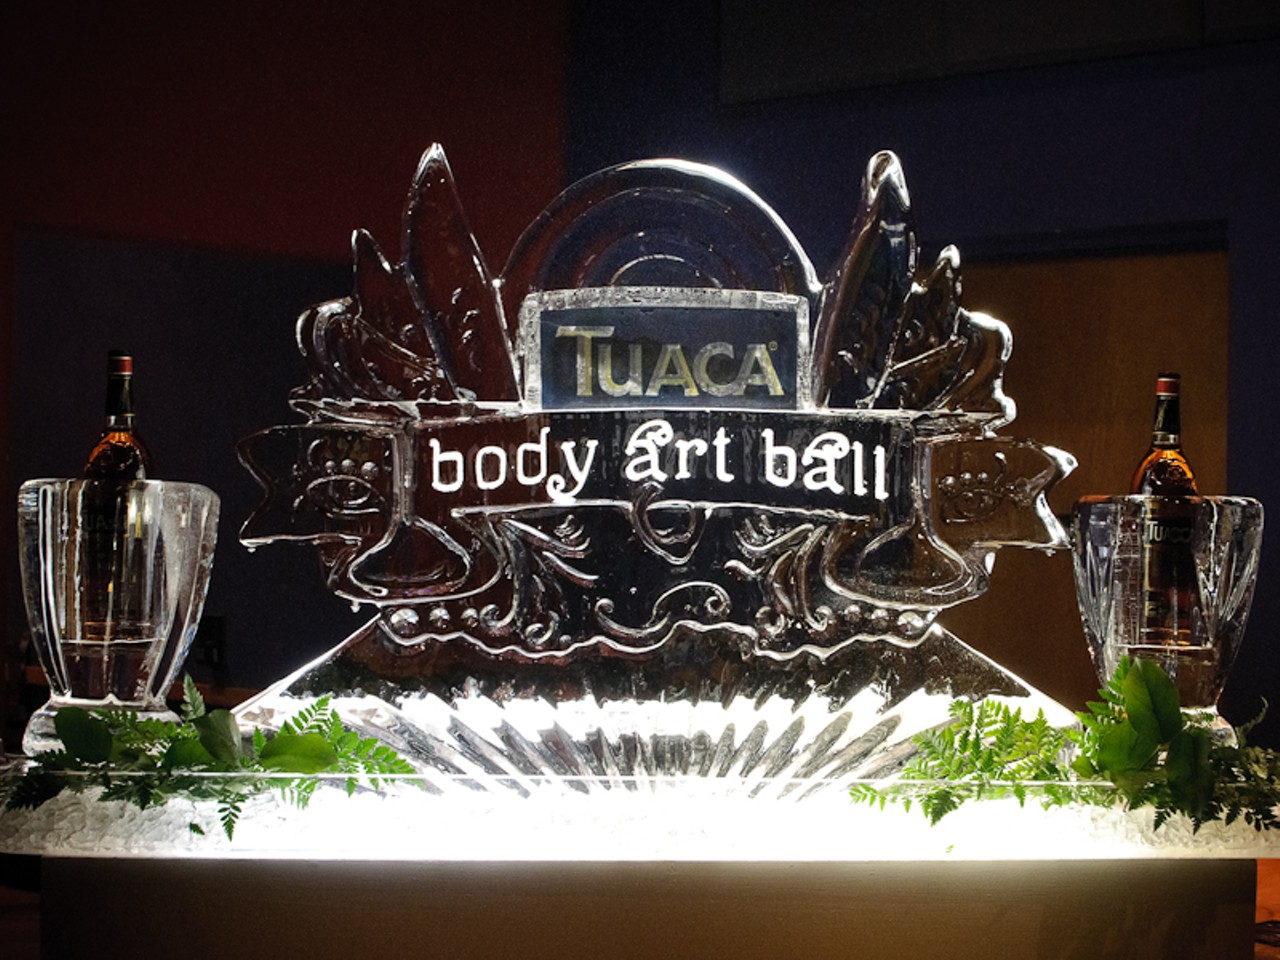 Tuaca acts as a sponsor for the event, providing beverages and funding for the Body Art Ball.